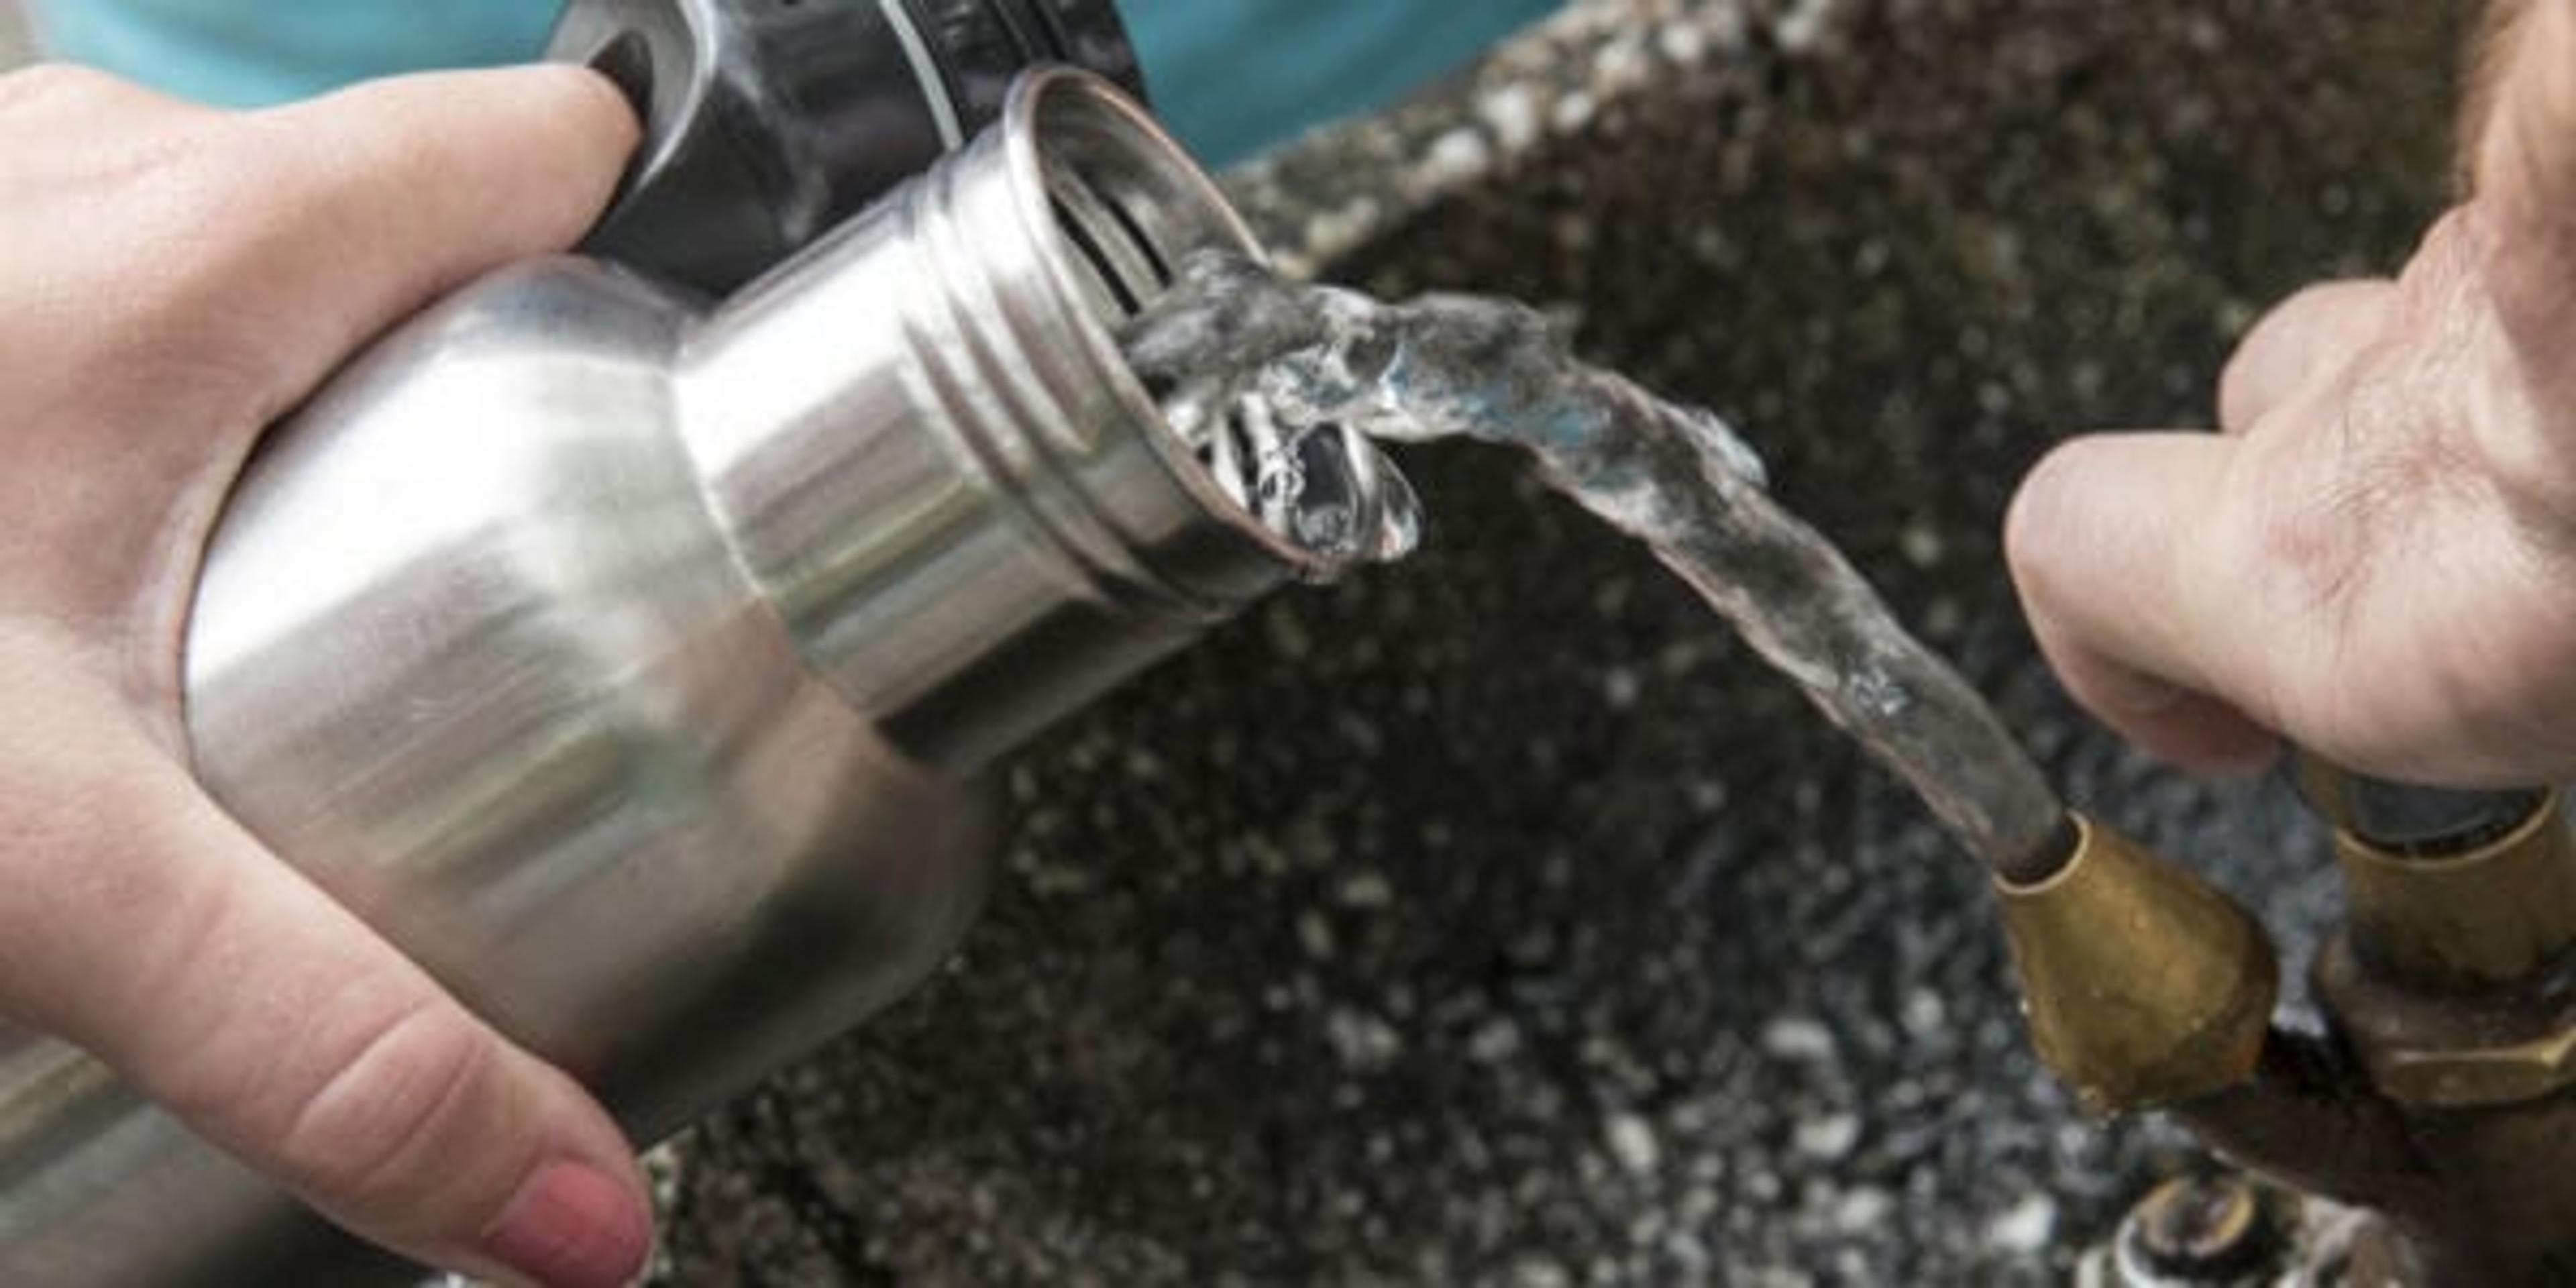 Image of hands filling a reusable water bottle from a water fountain.